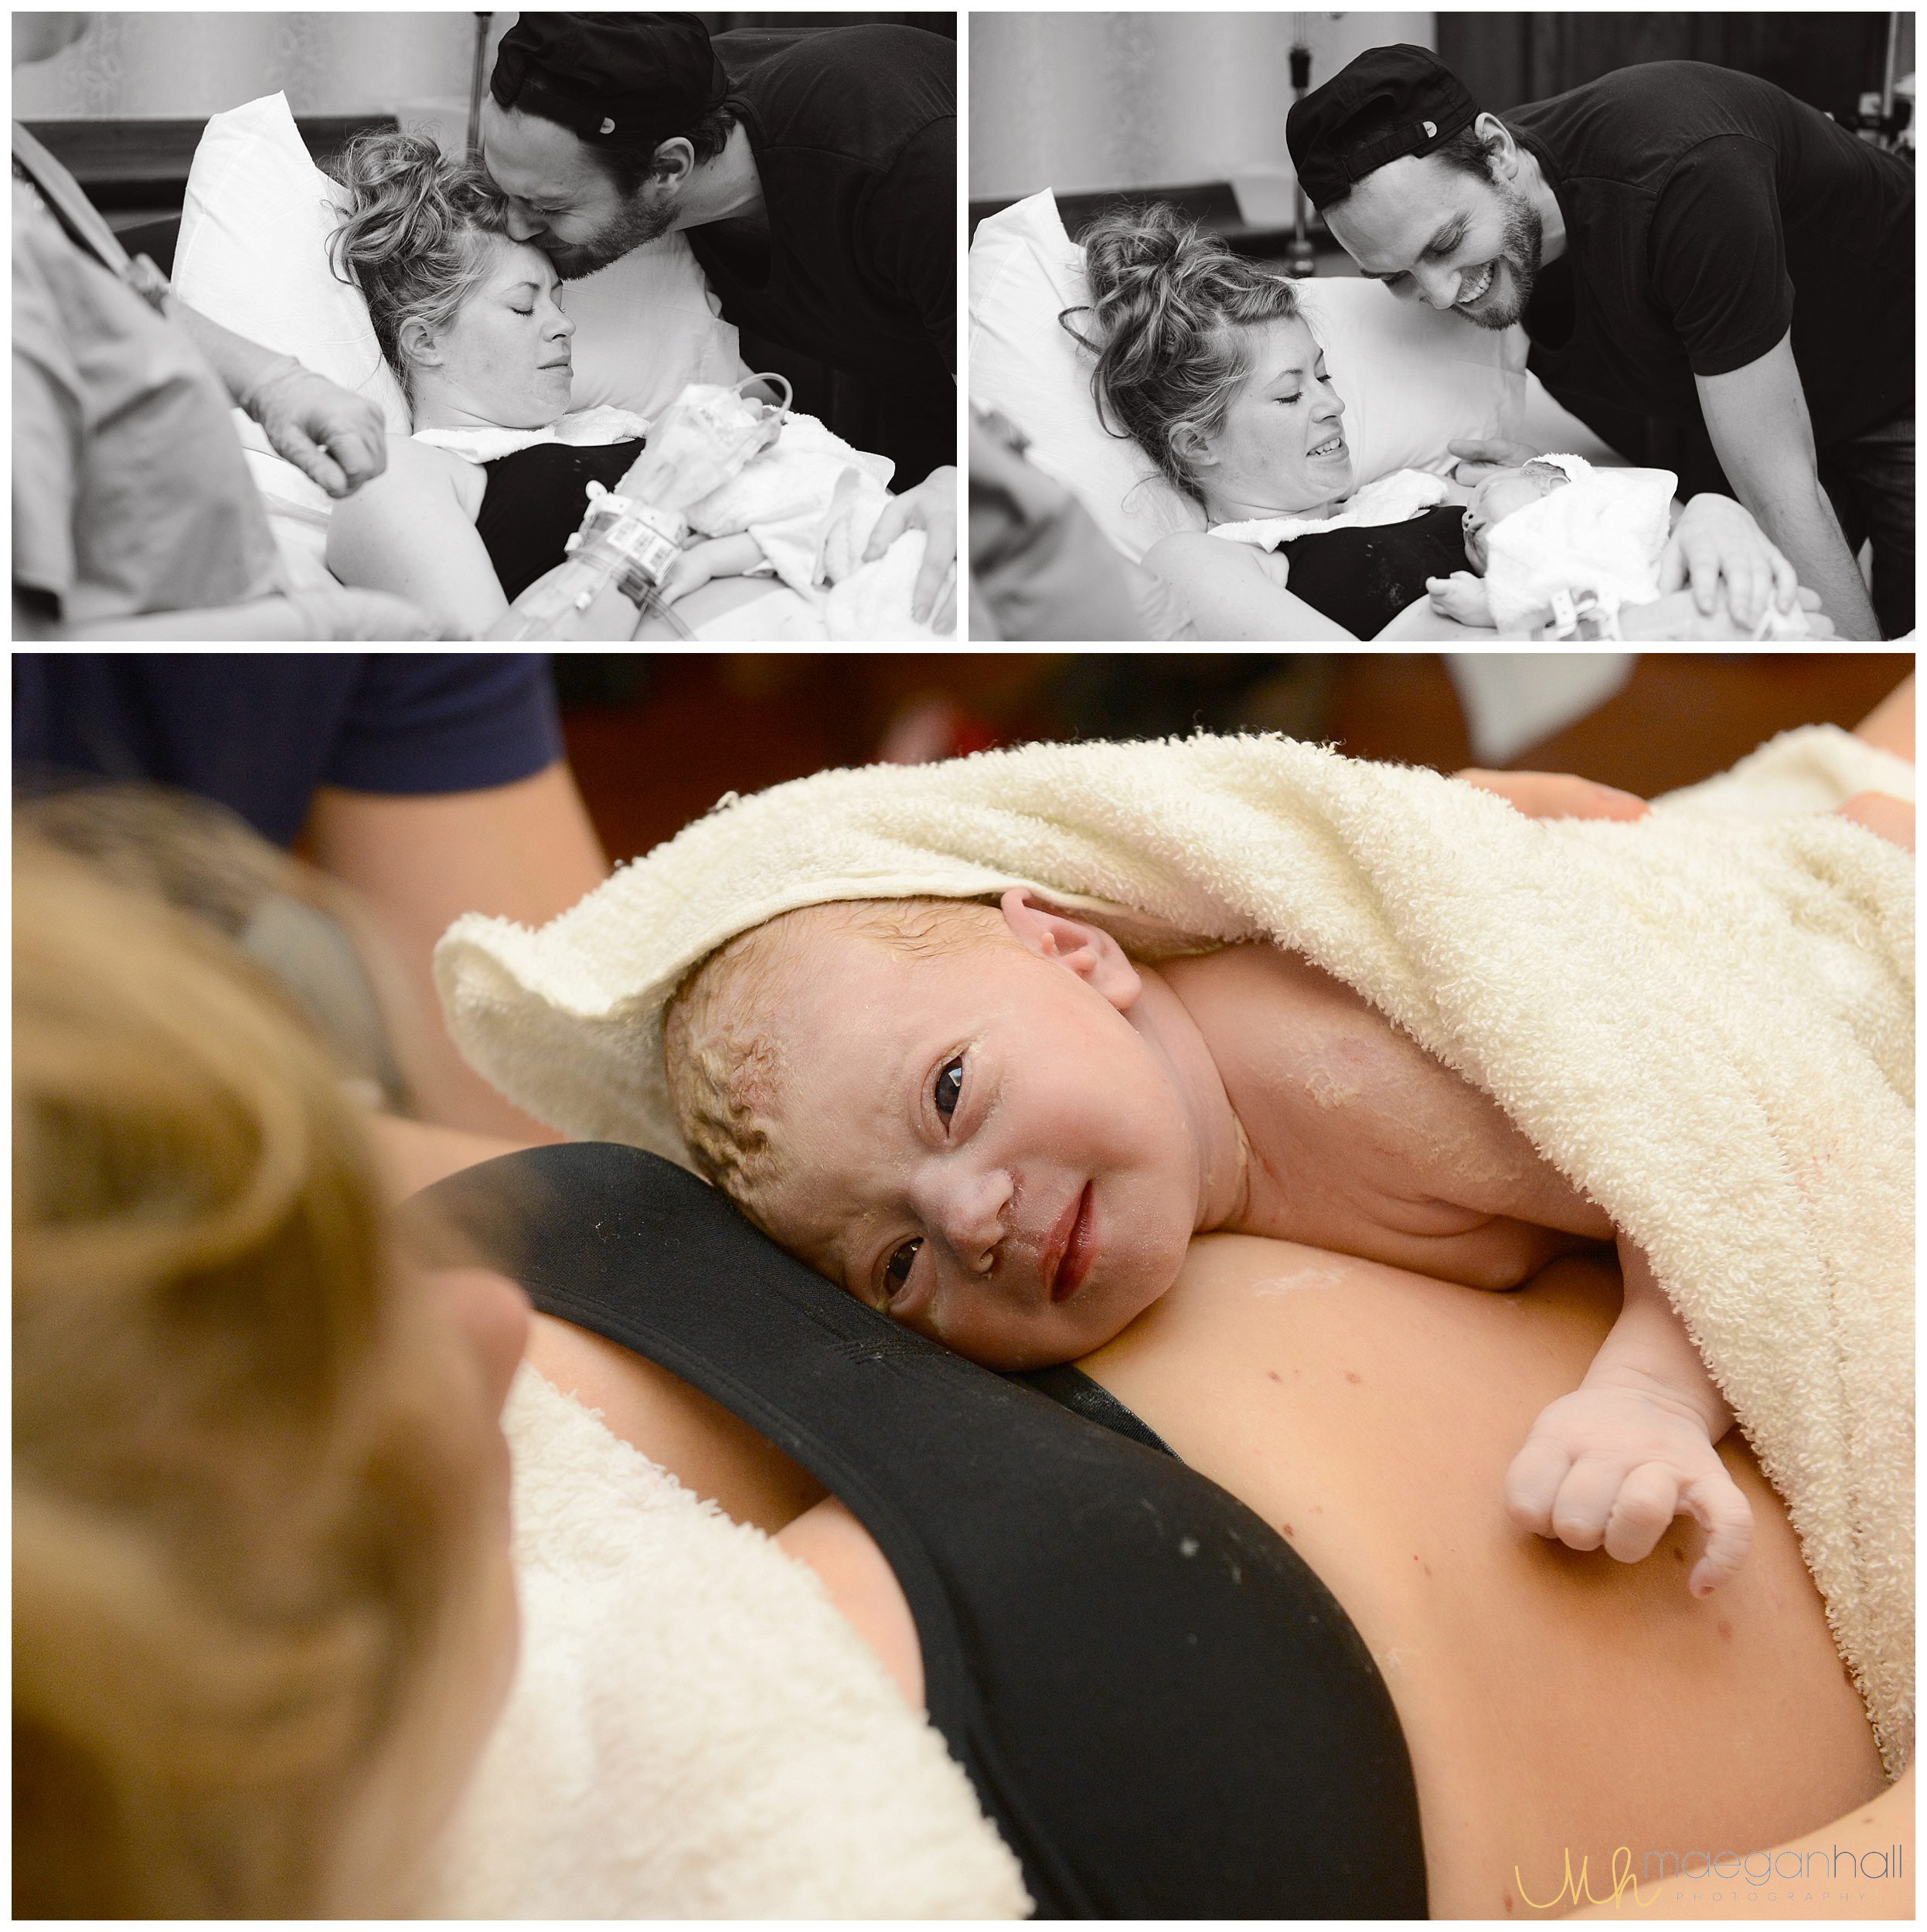 north-fulton-hospital-dad-catches-baby-atlanta-doula-birth-photographer-photography-photo-pictures